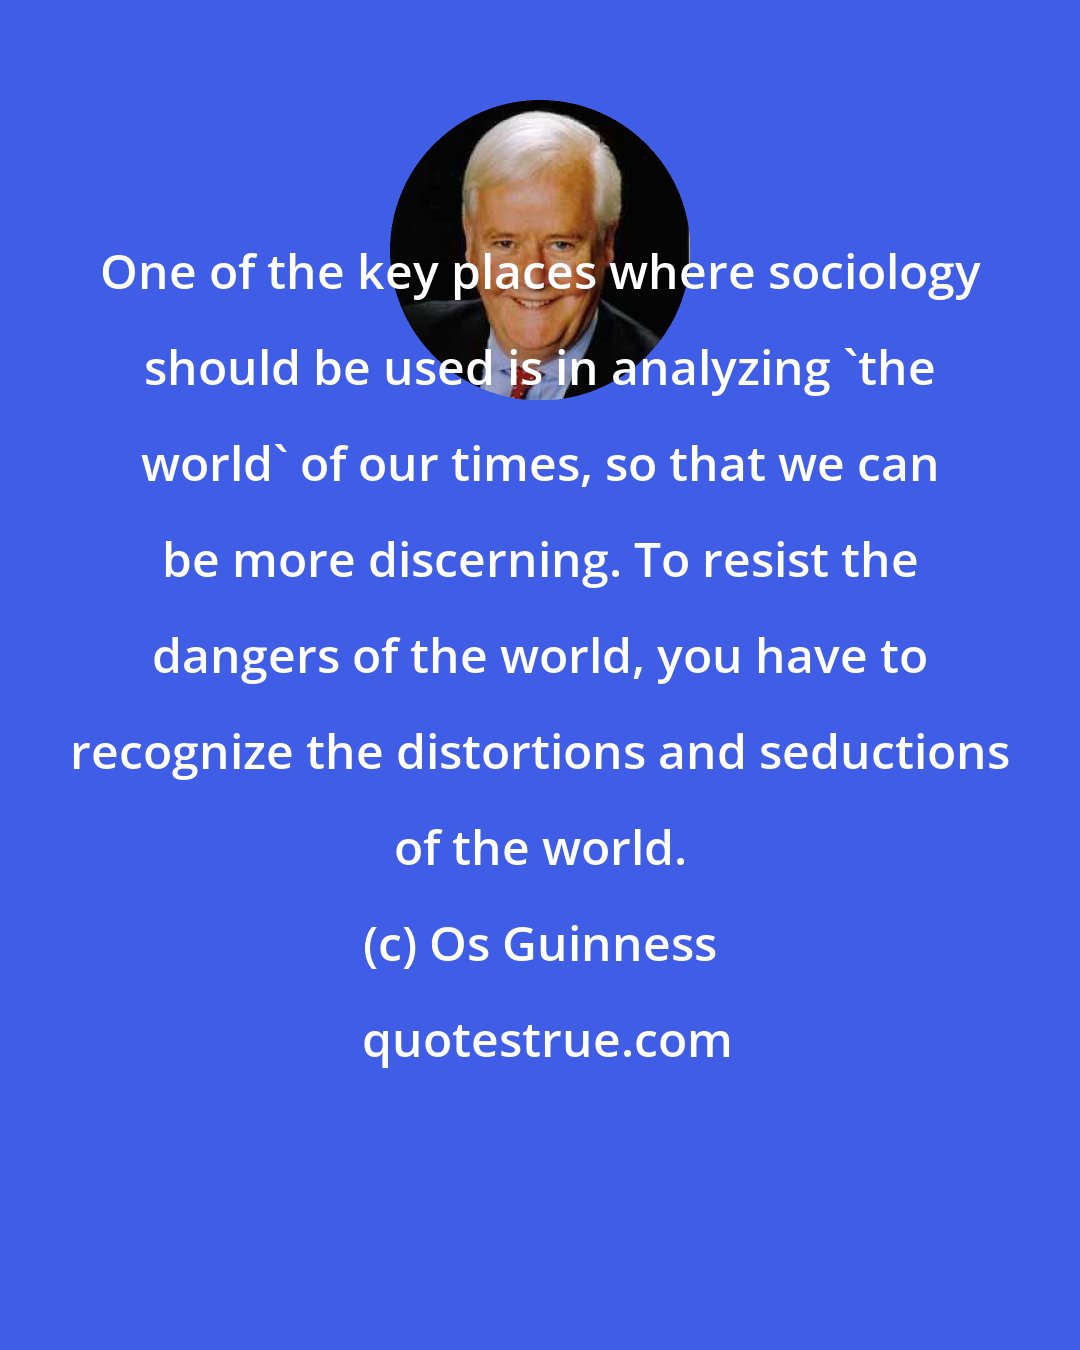 Os Guinness: One of the key places where sociology should be used is in analyzing 'the world' of our times, so that we can be more discerning. To resist the dangers of the world, you have to recognize the distortions and seductions of the world.